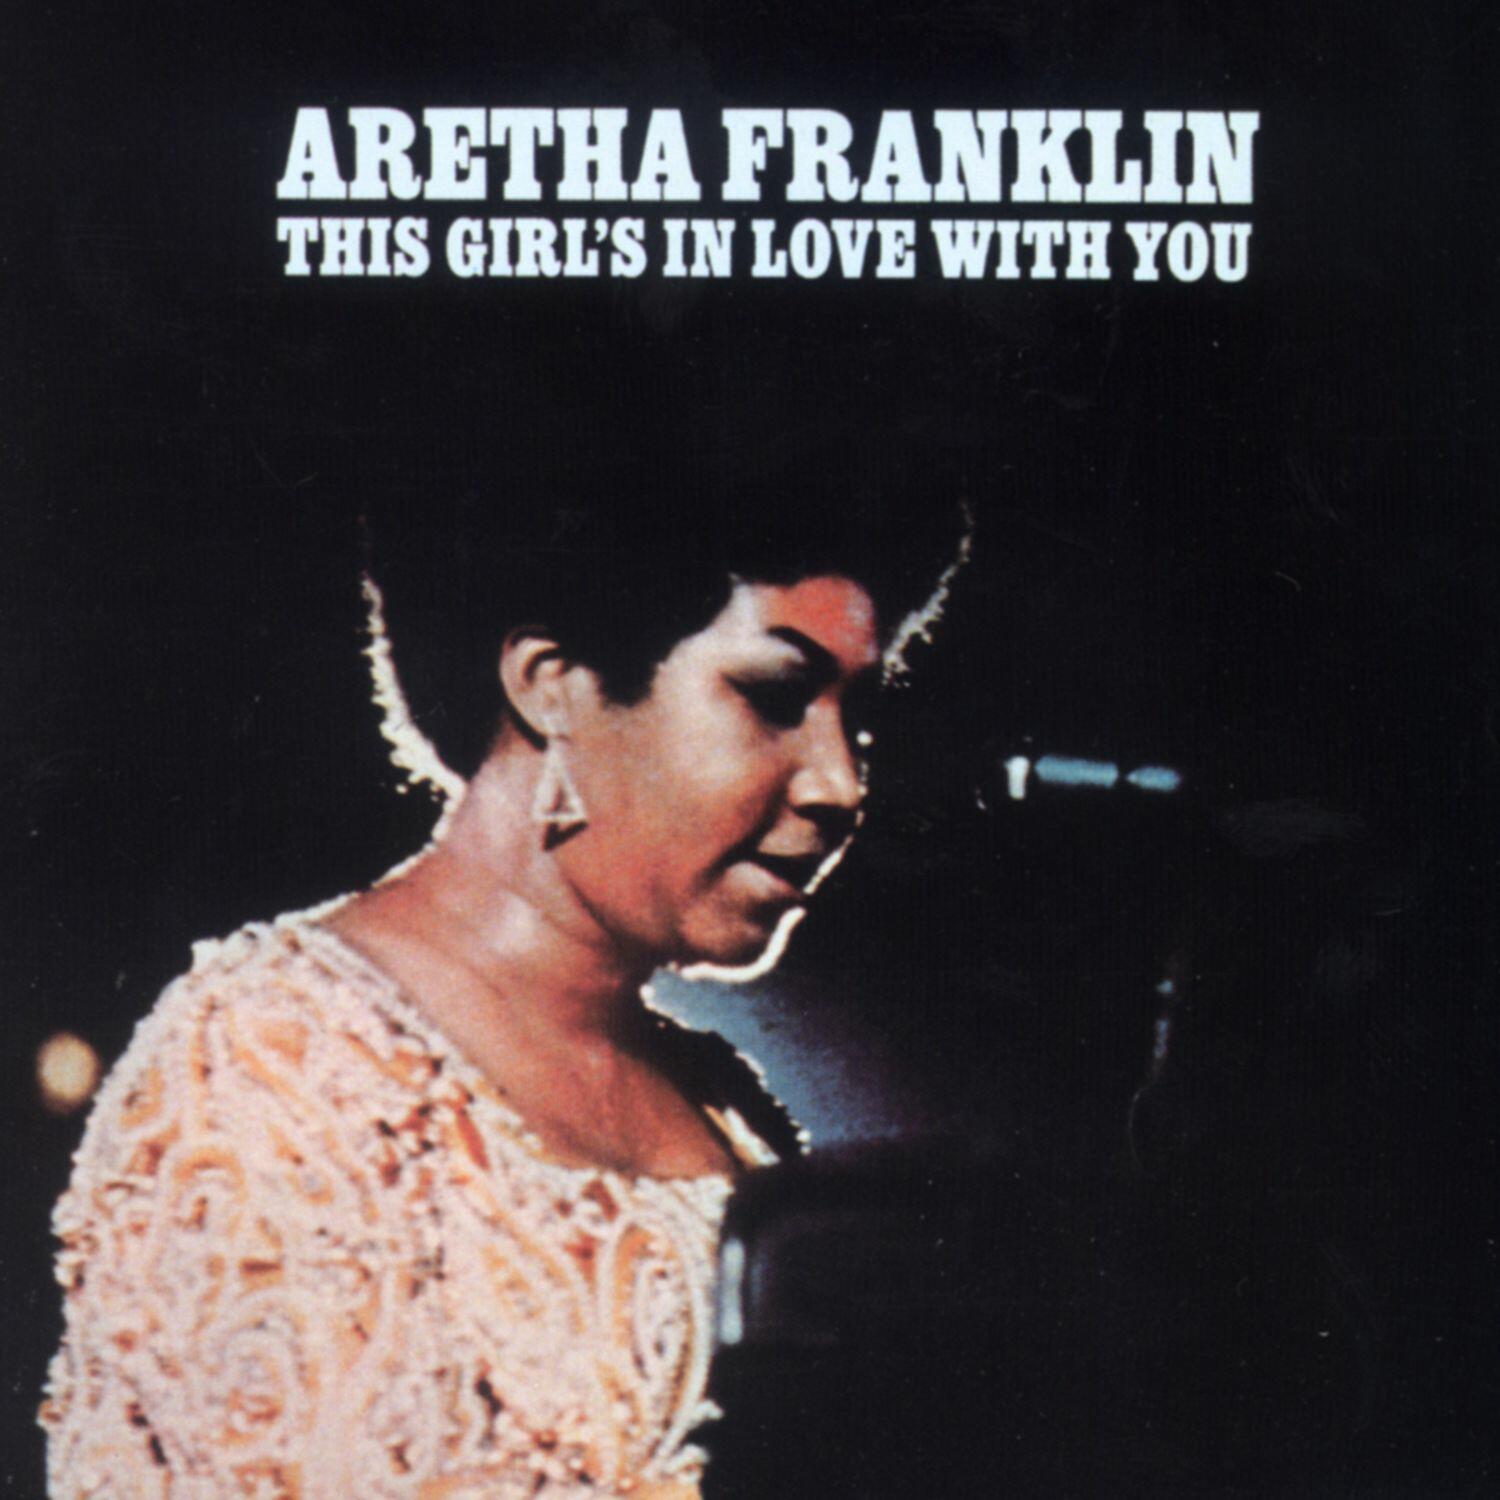 Listen Free to Aretha Franklin This Girl's In Love WIth You Radio on iHeartRadio iHeartRadio